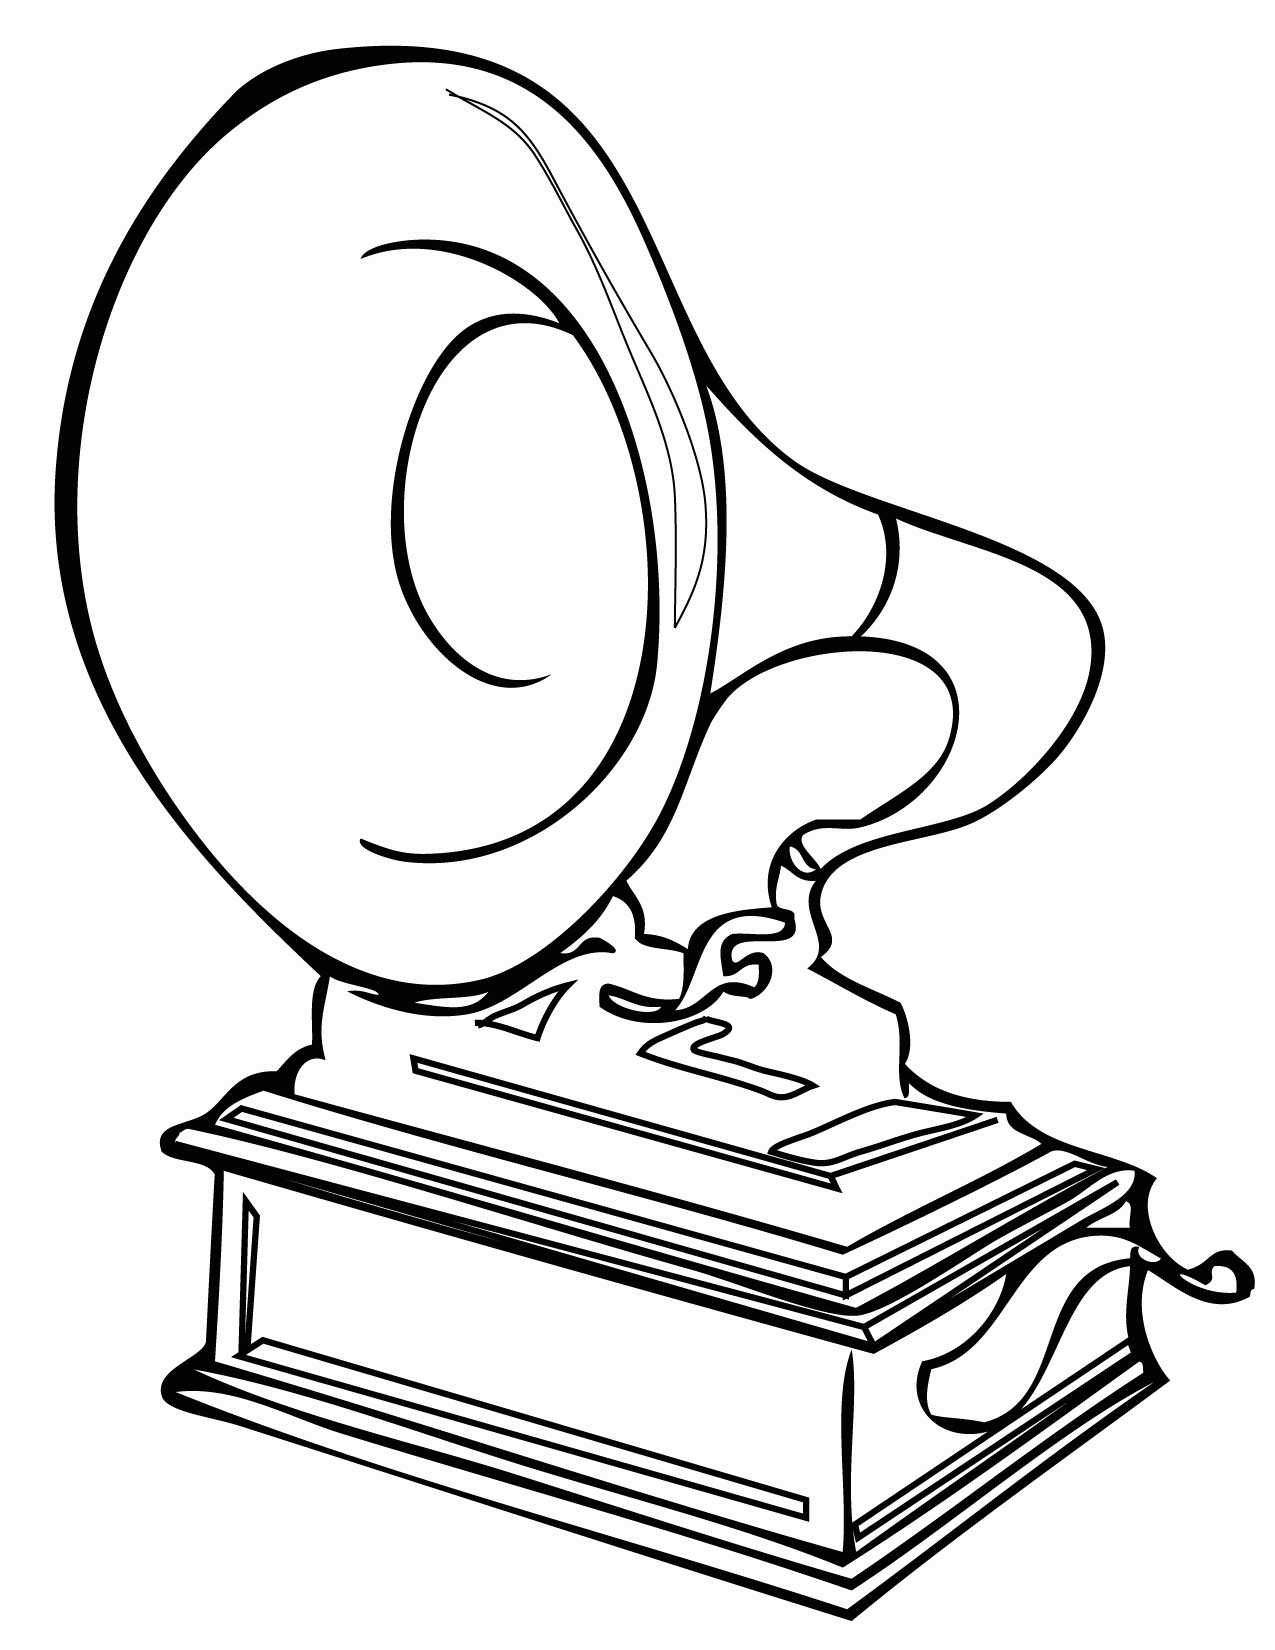 Phonograph - Thomas Edison Coloring Pages